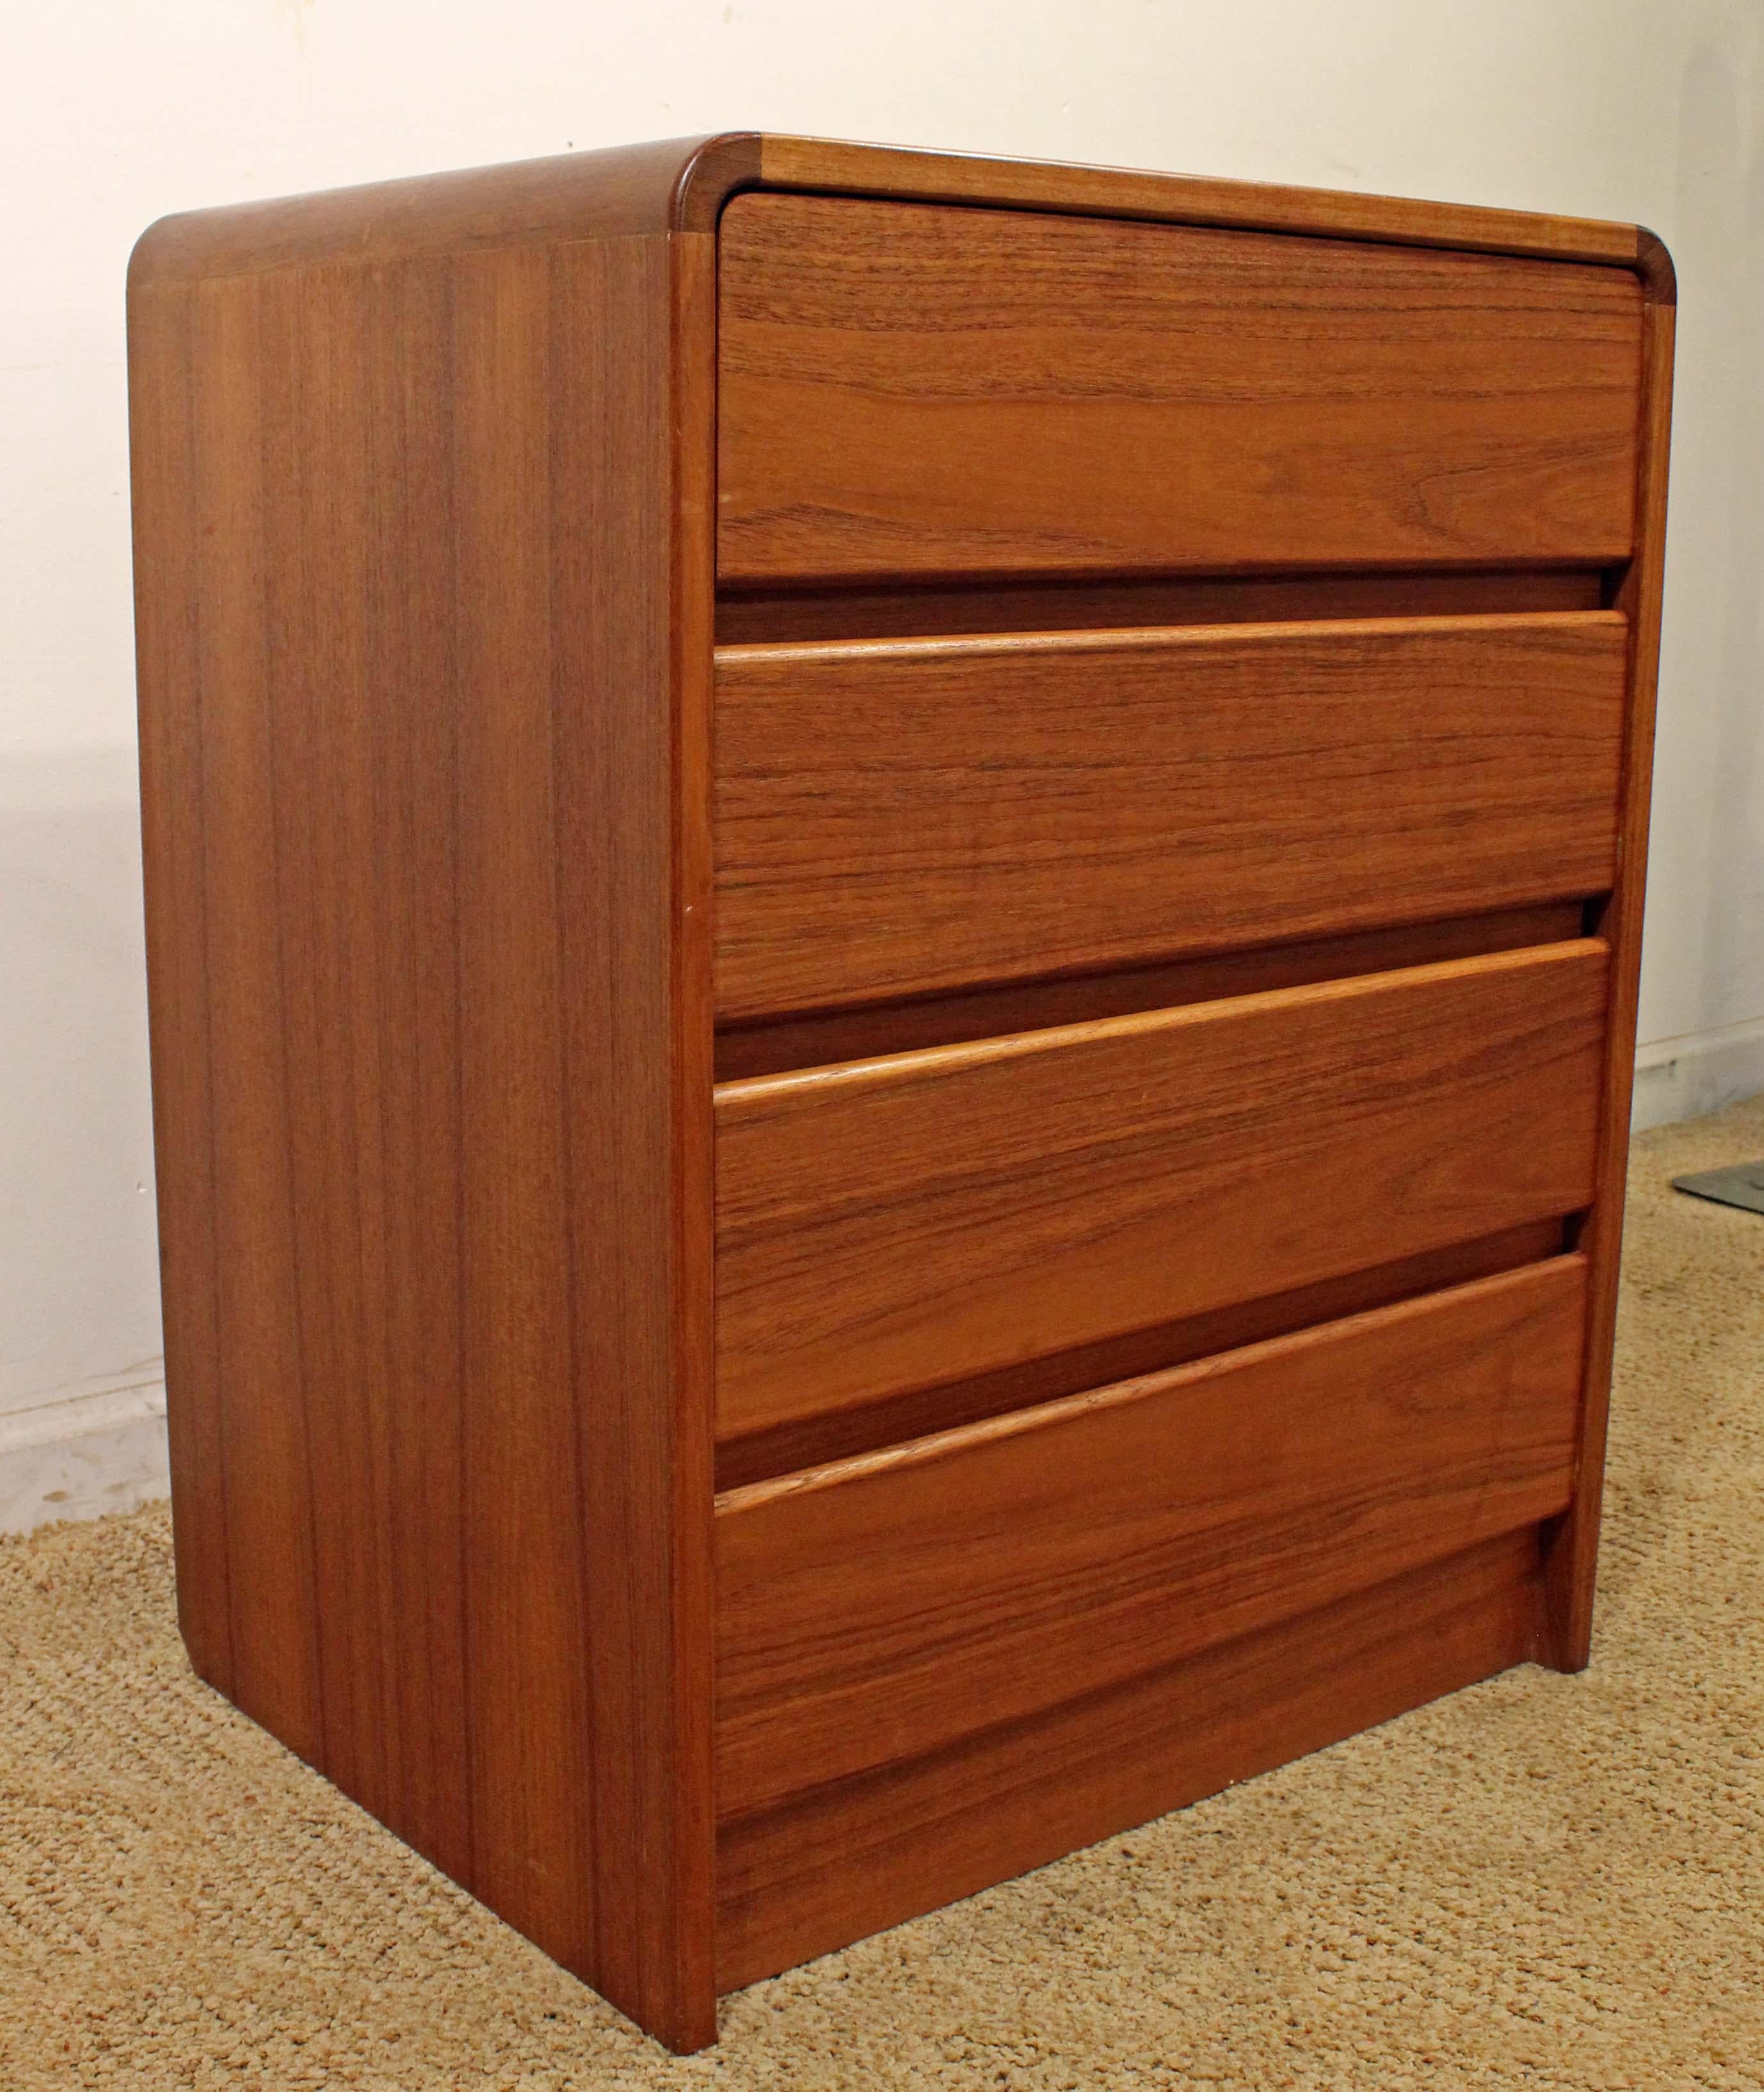 Offered is a Danish modern lingerie chest made by Vinde Mobler. The piece is made of teak and has seven drawers. It is in excellent condition, shows some minor wear. It is signed.

Dimensions:
23.25